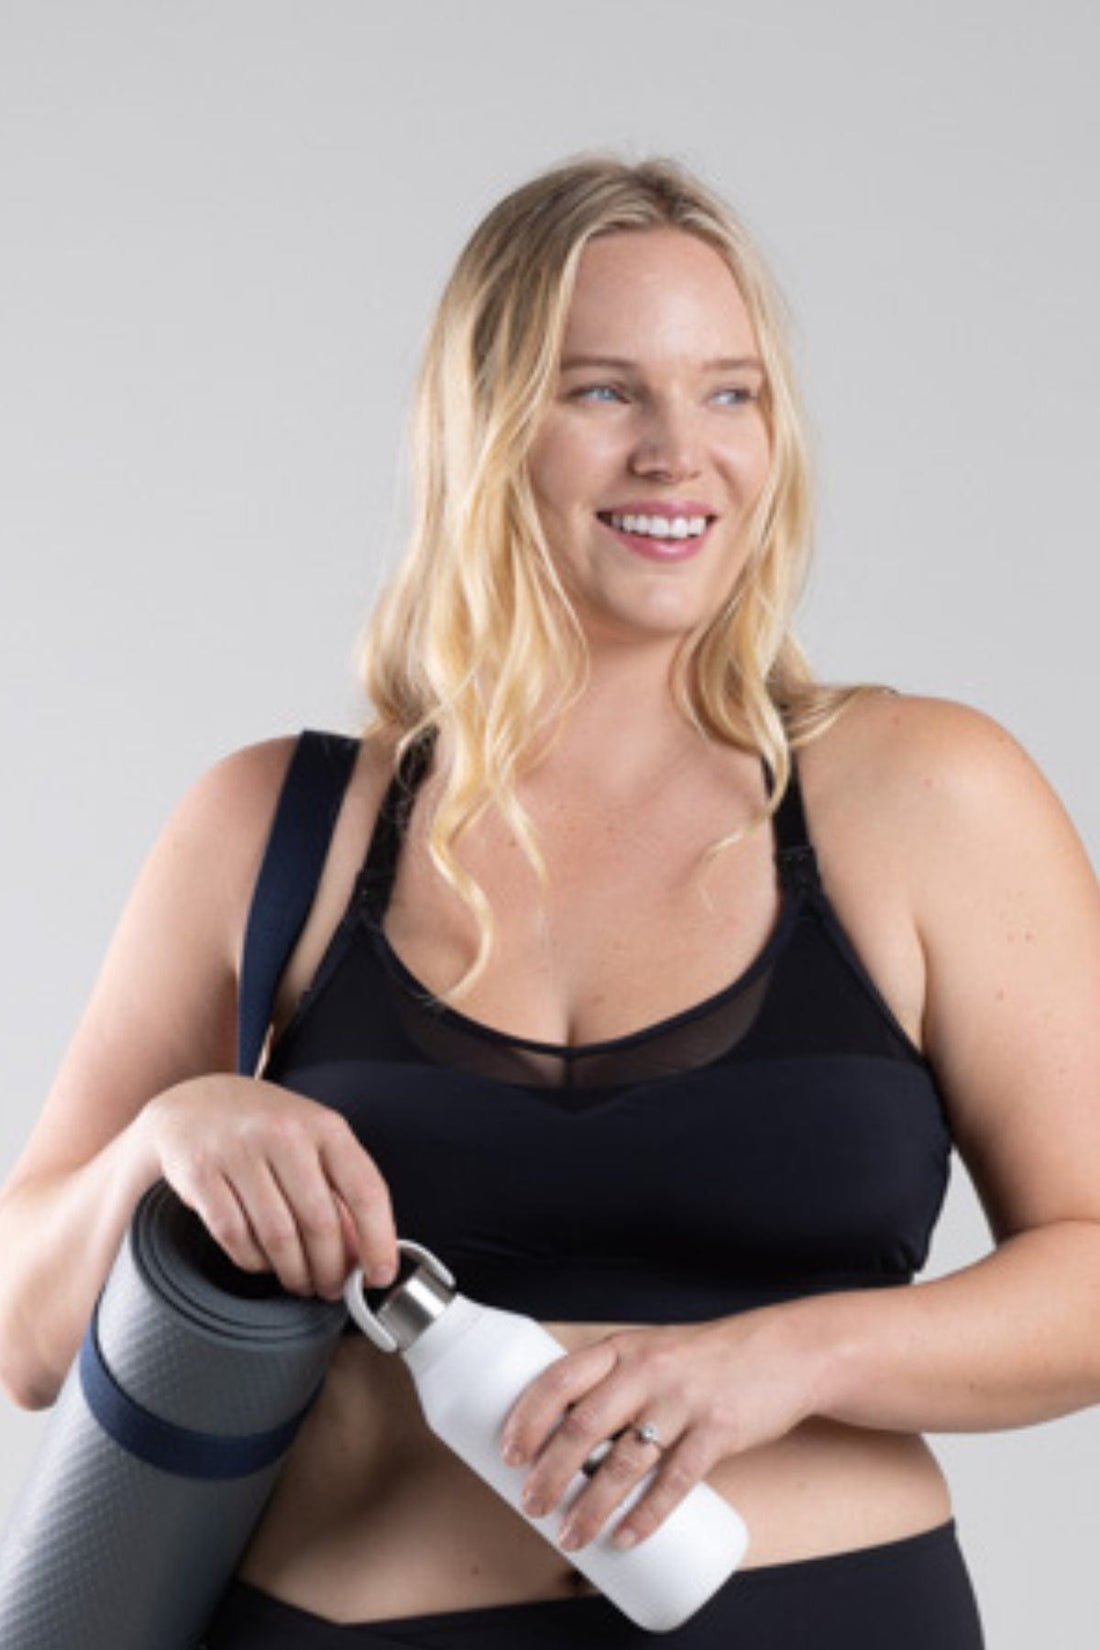 Stylish and Comfortable Maternity Activewear for Active Moms